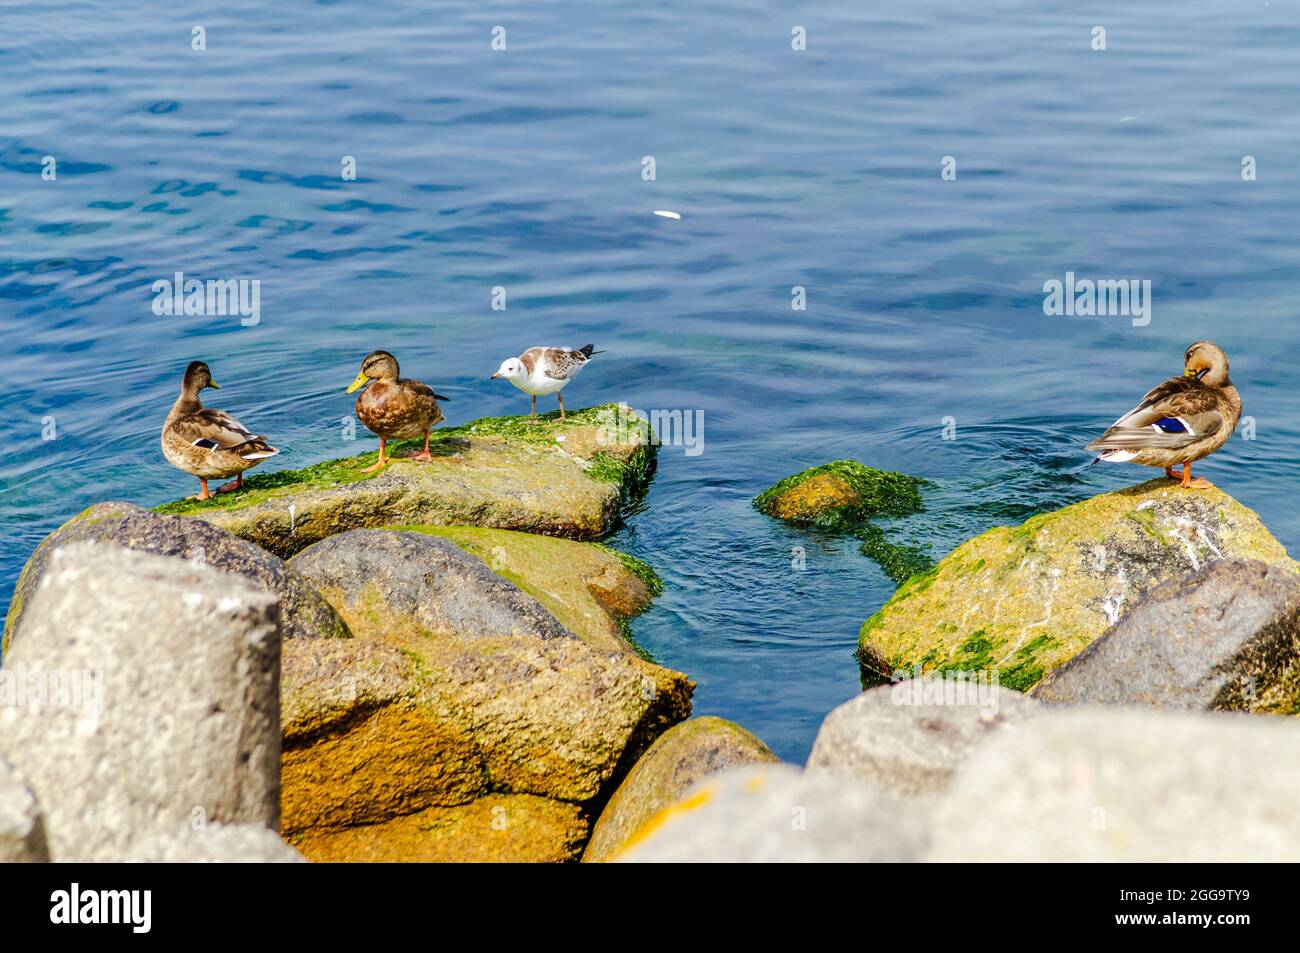 seagull and ducks on colorful sea stones overgrown with algae and seaweed Stock Photo